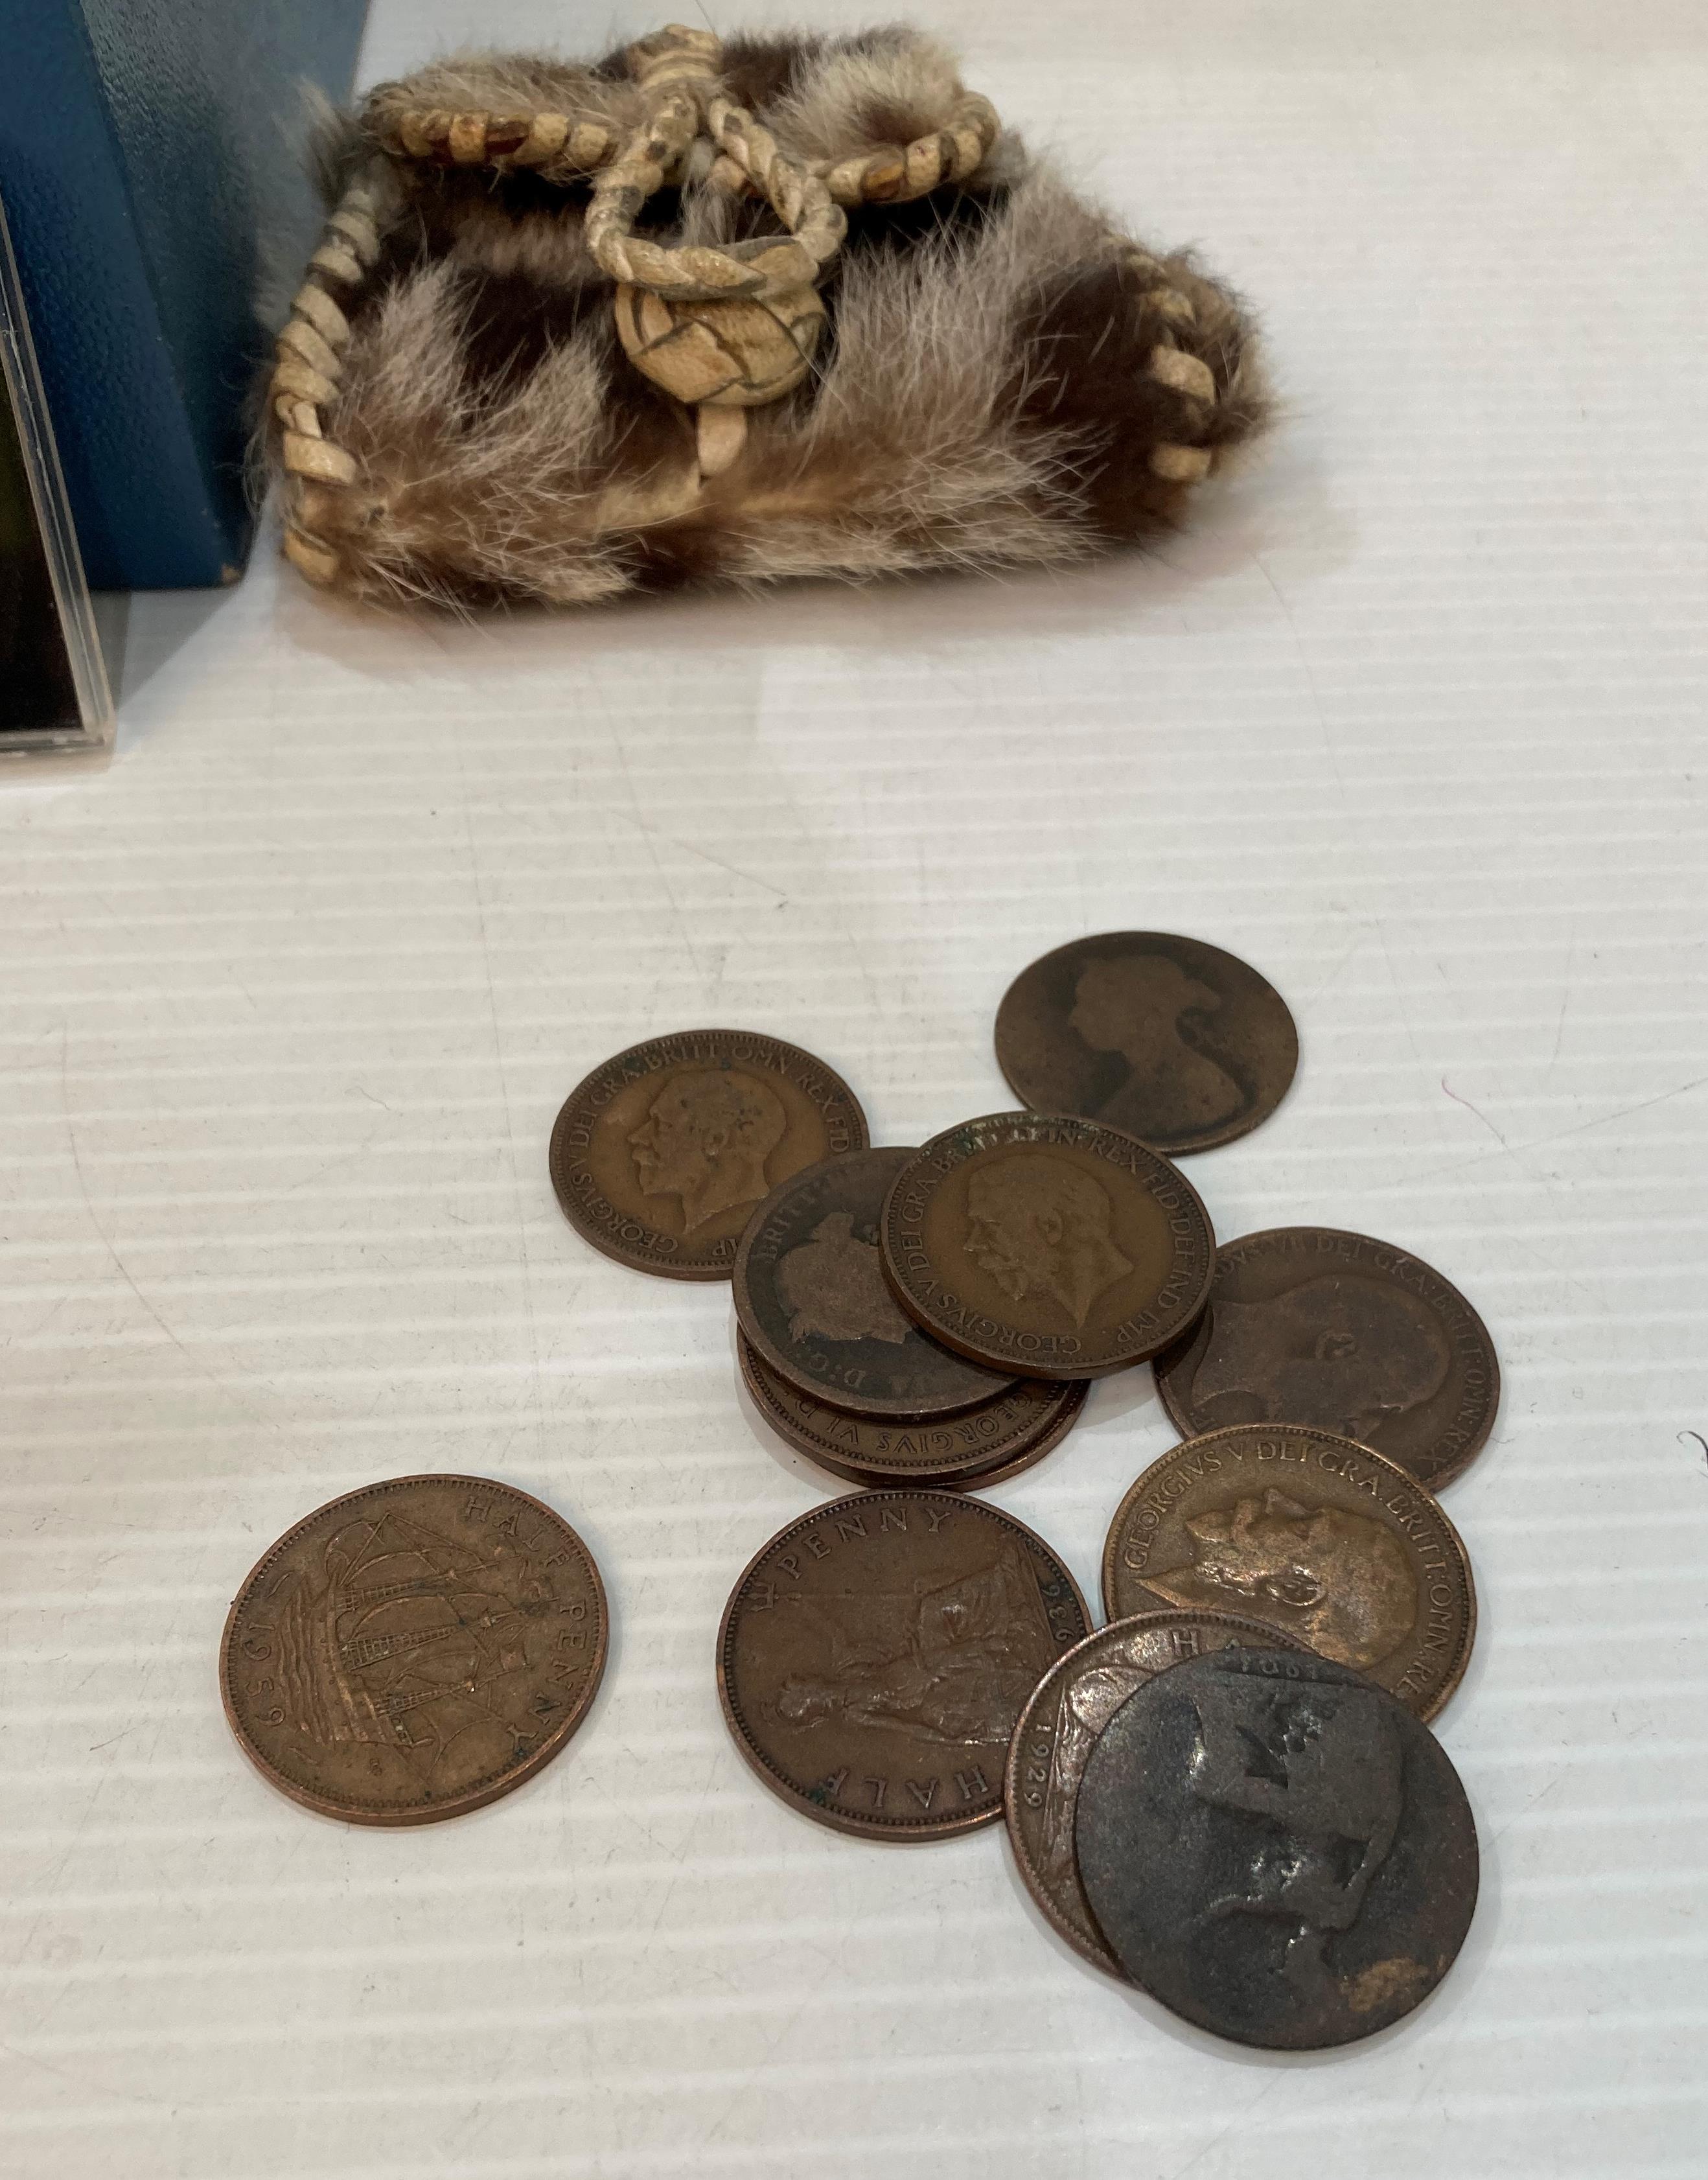 Contents to box and tin - assorted coins including British shillings, one penny, two shillings, - Image 5 of 5